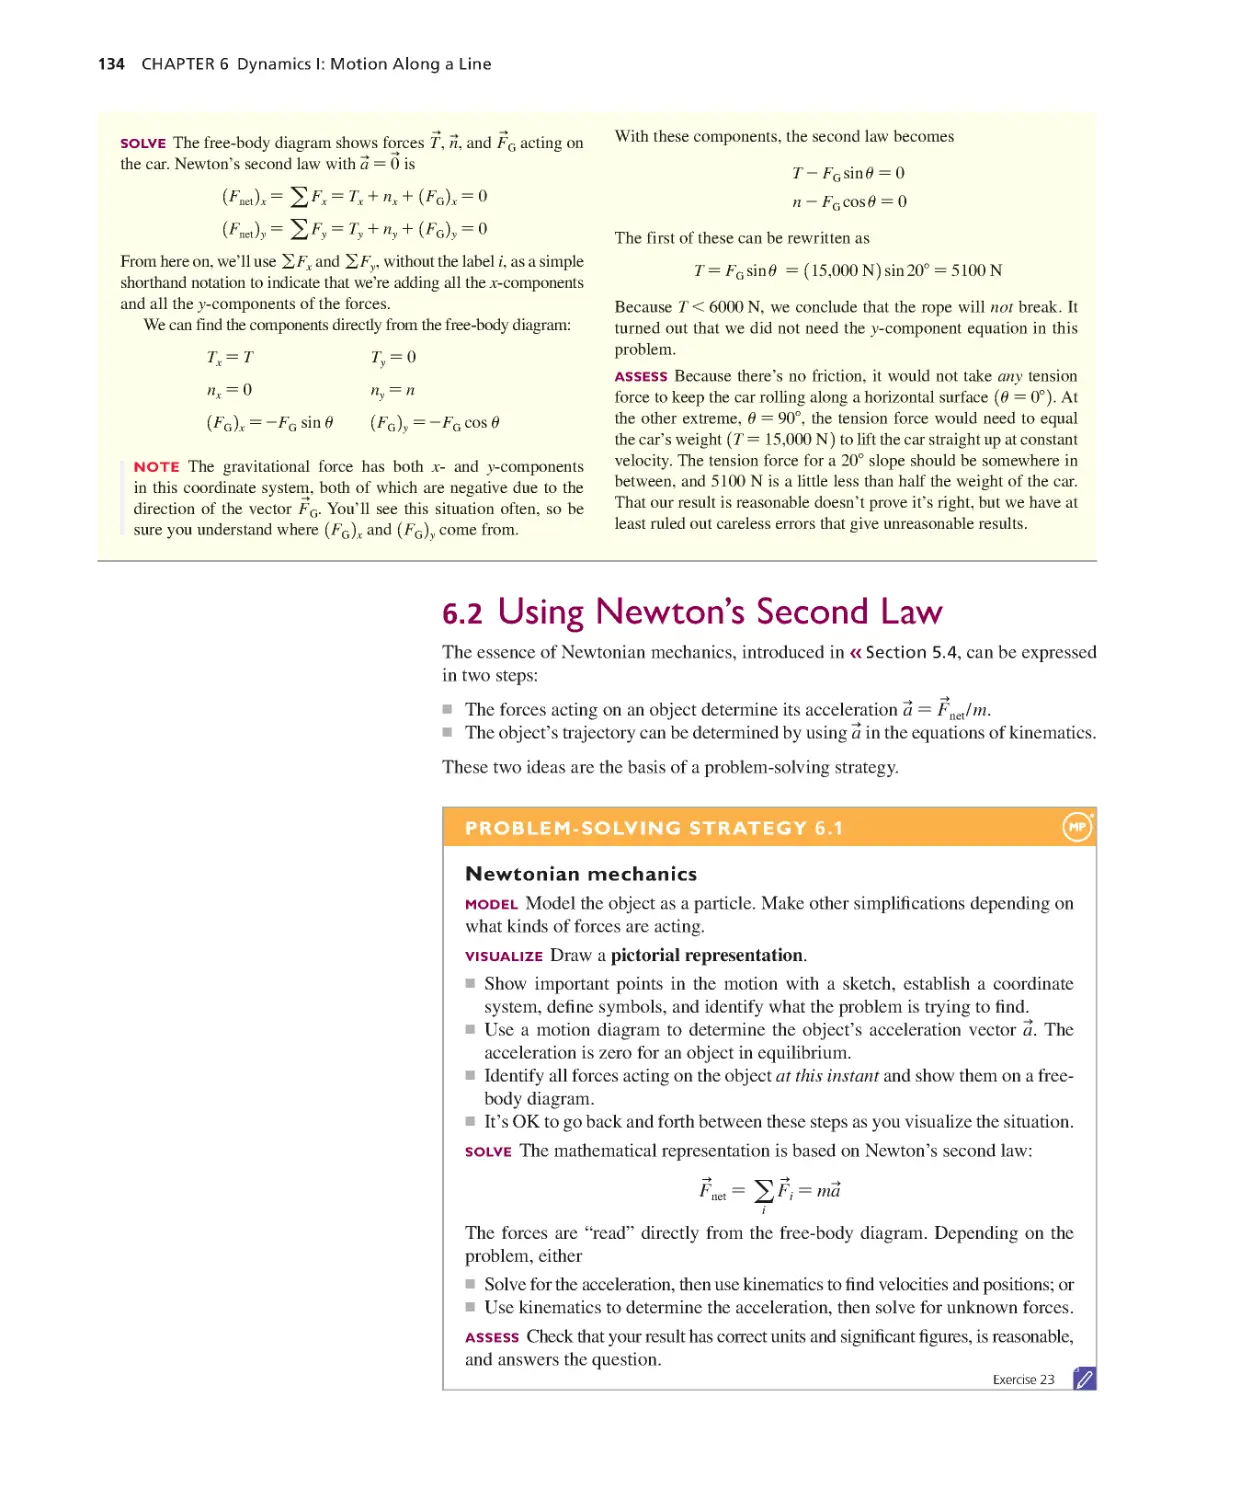 6.2. Using Newton’s Second Law